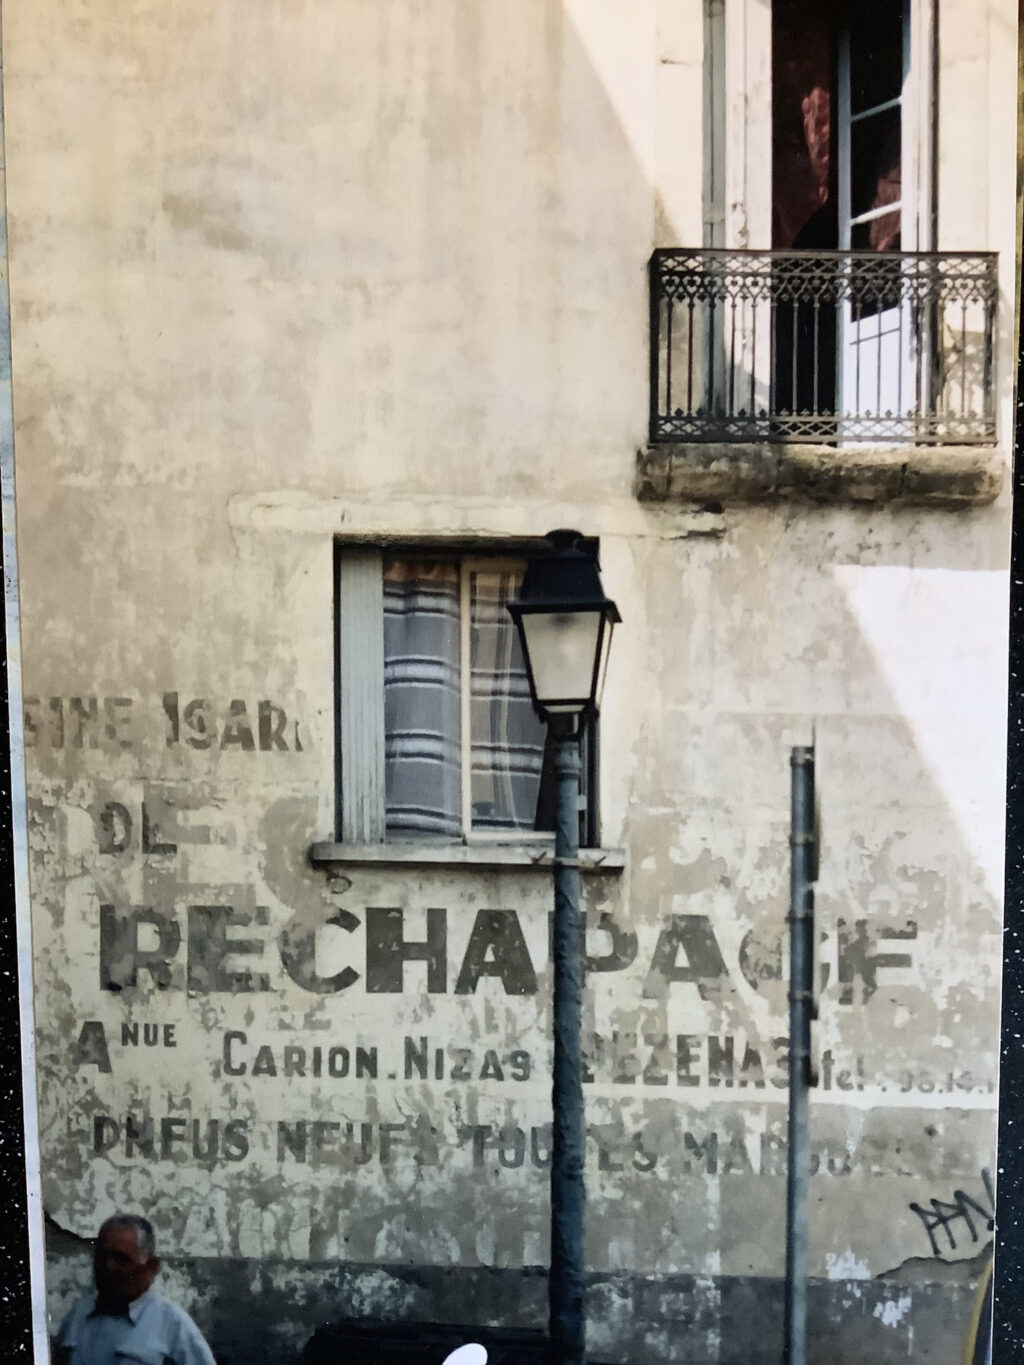 Rural French townhouse building with a fading painted sign on the lower portion of the wall. The main text of this reads 'Rechapage'